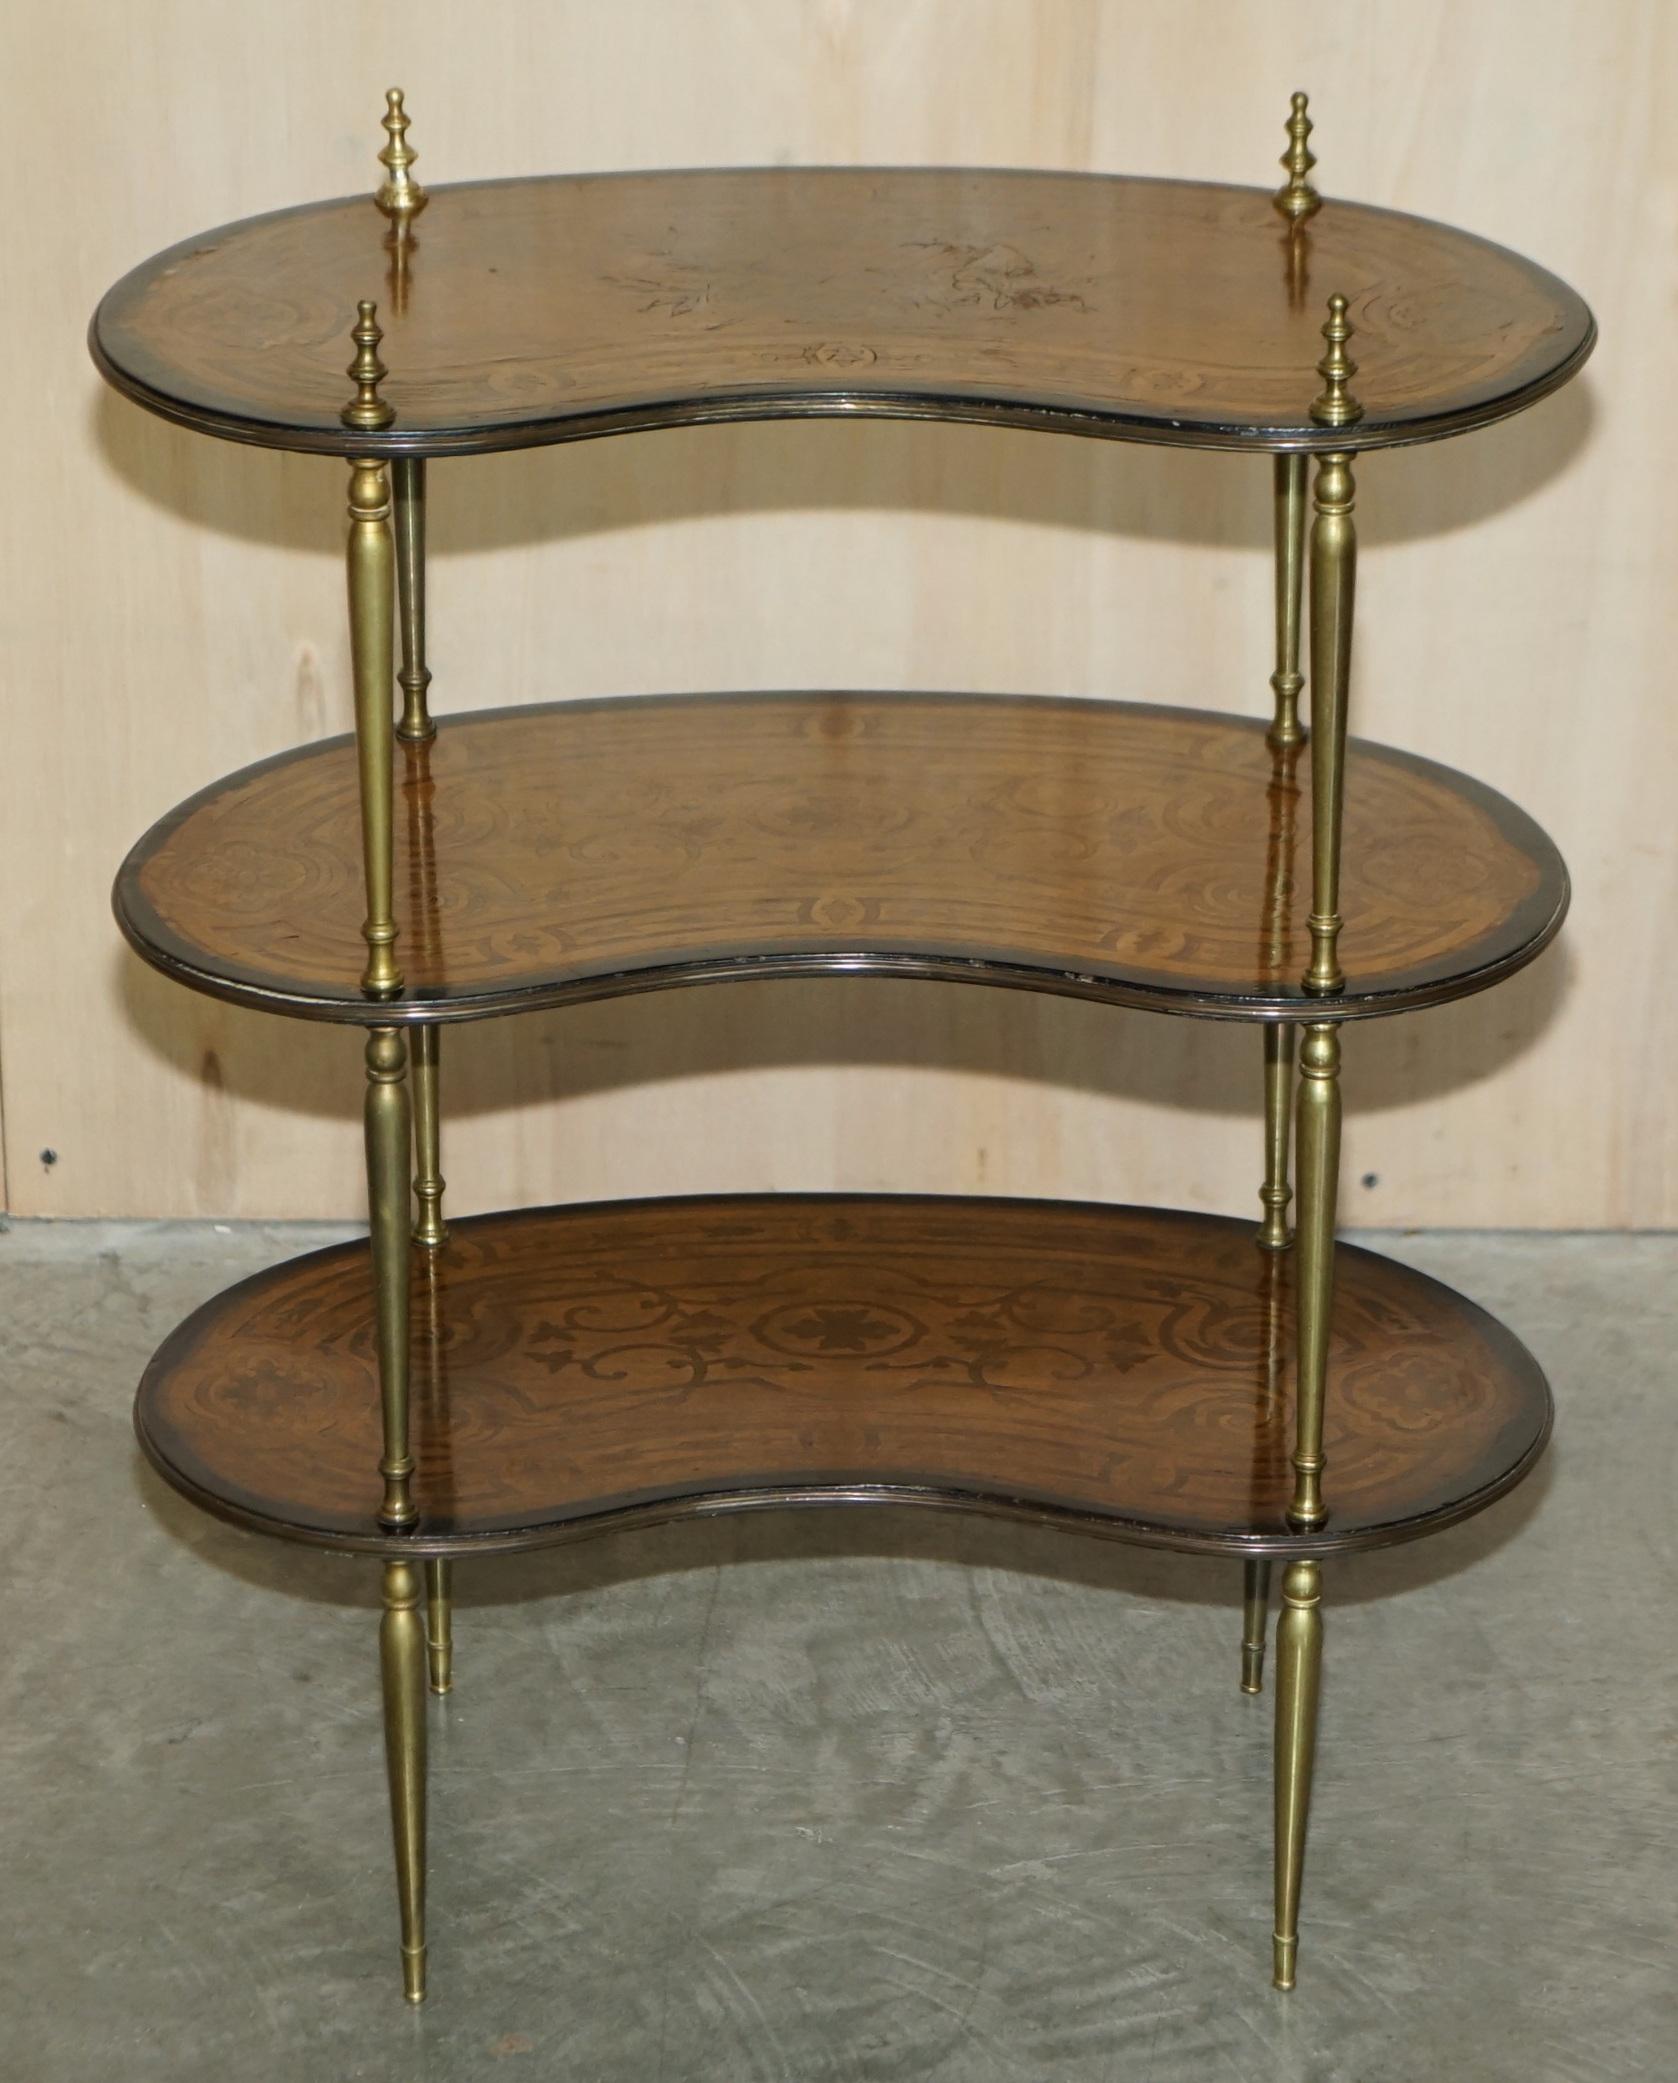 European Fine Pair of Antique Continental Three Tier Kidney Shaped Brass Etagere Tables For Sale